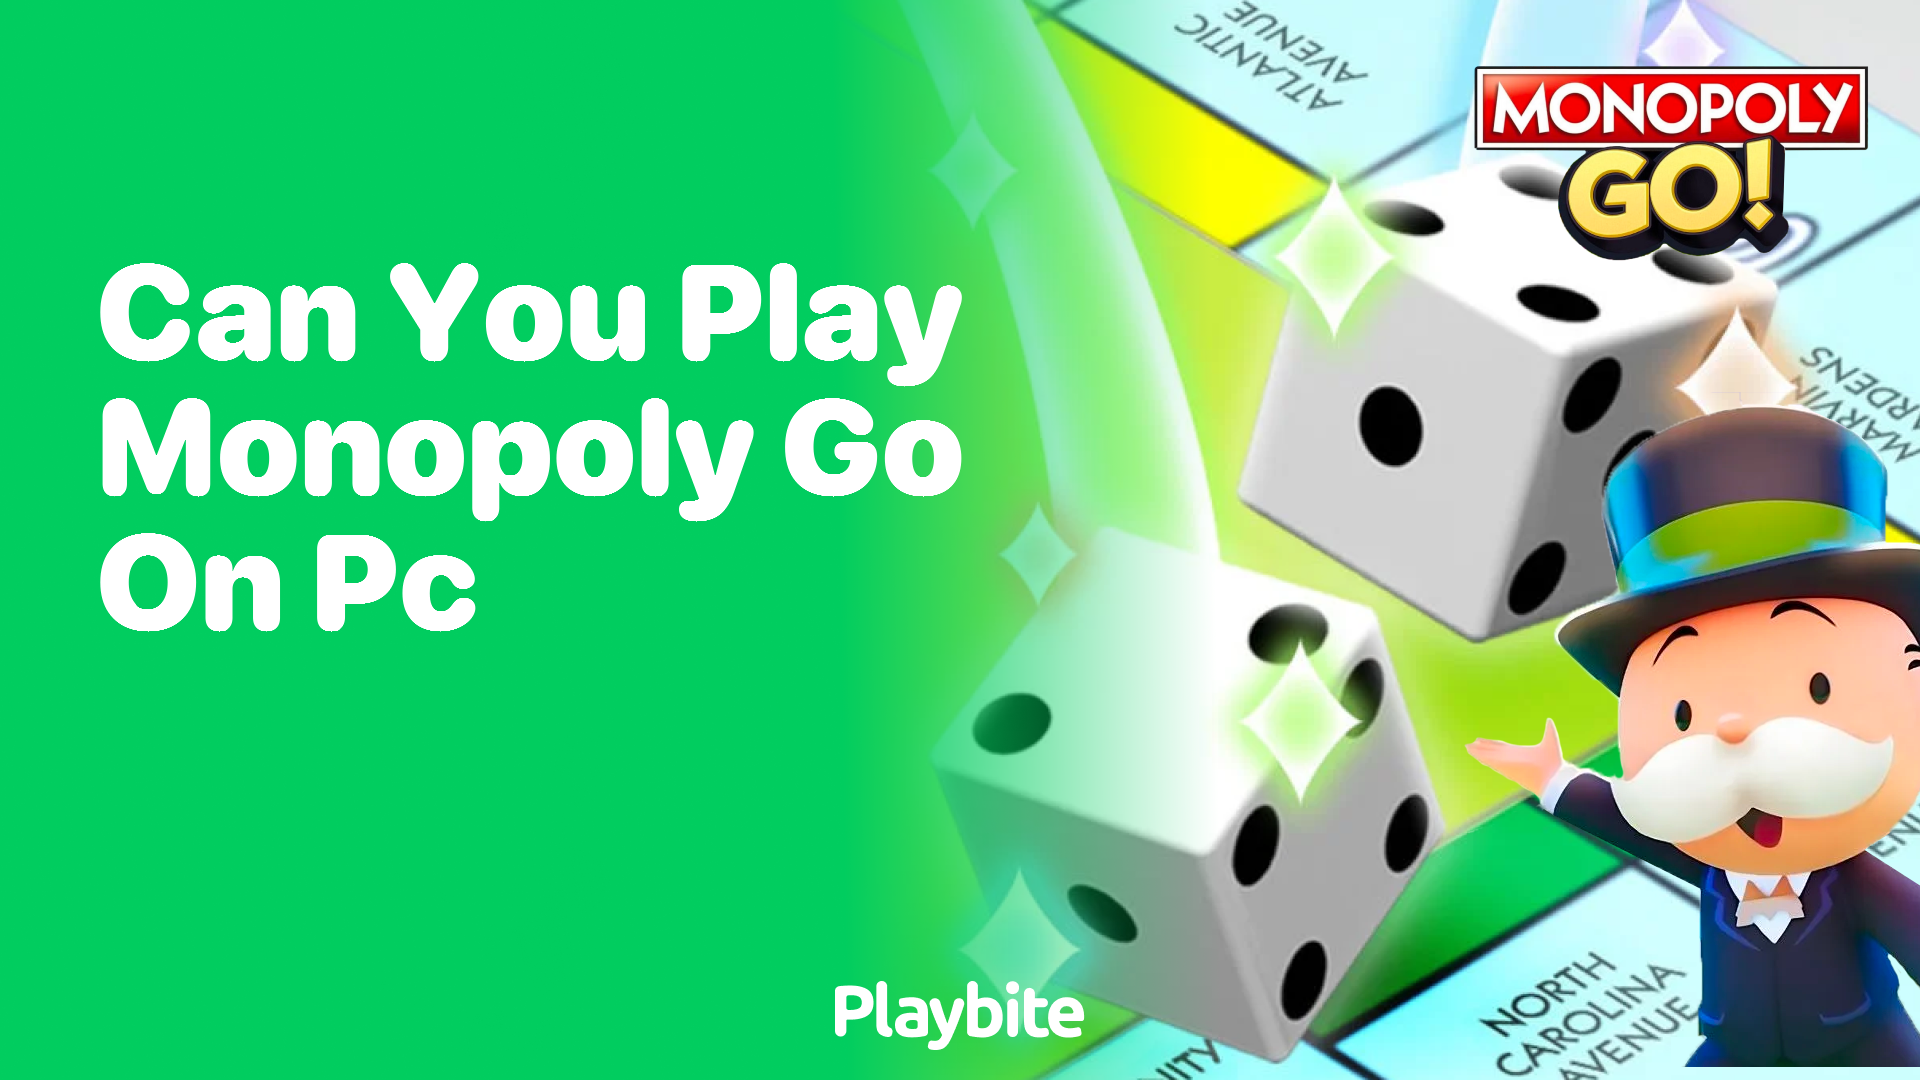 Can You Play Monopoly Go on PC?